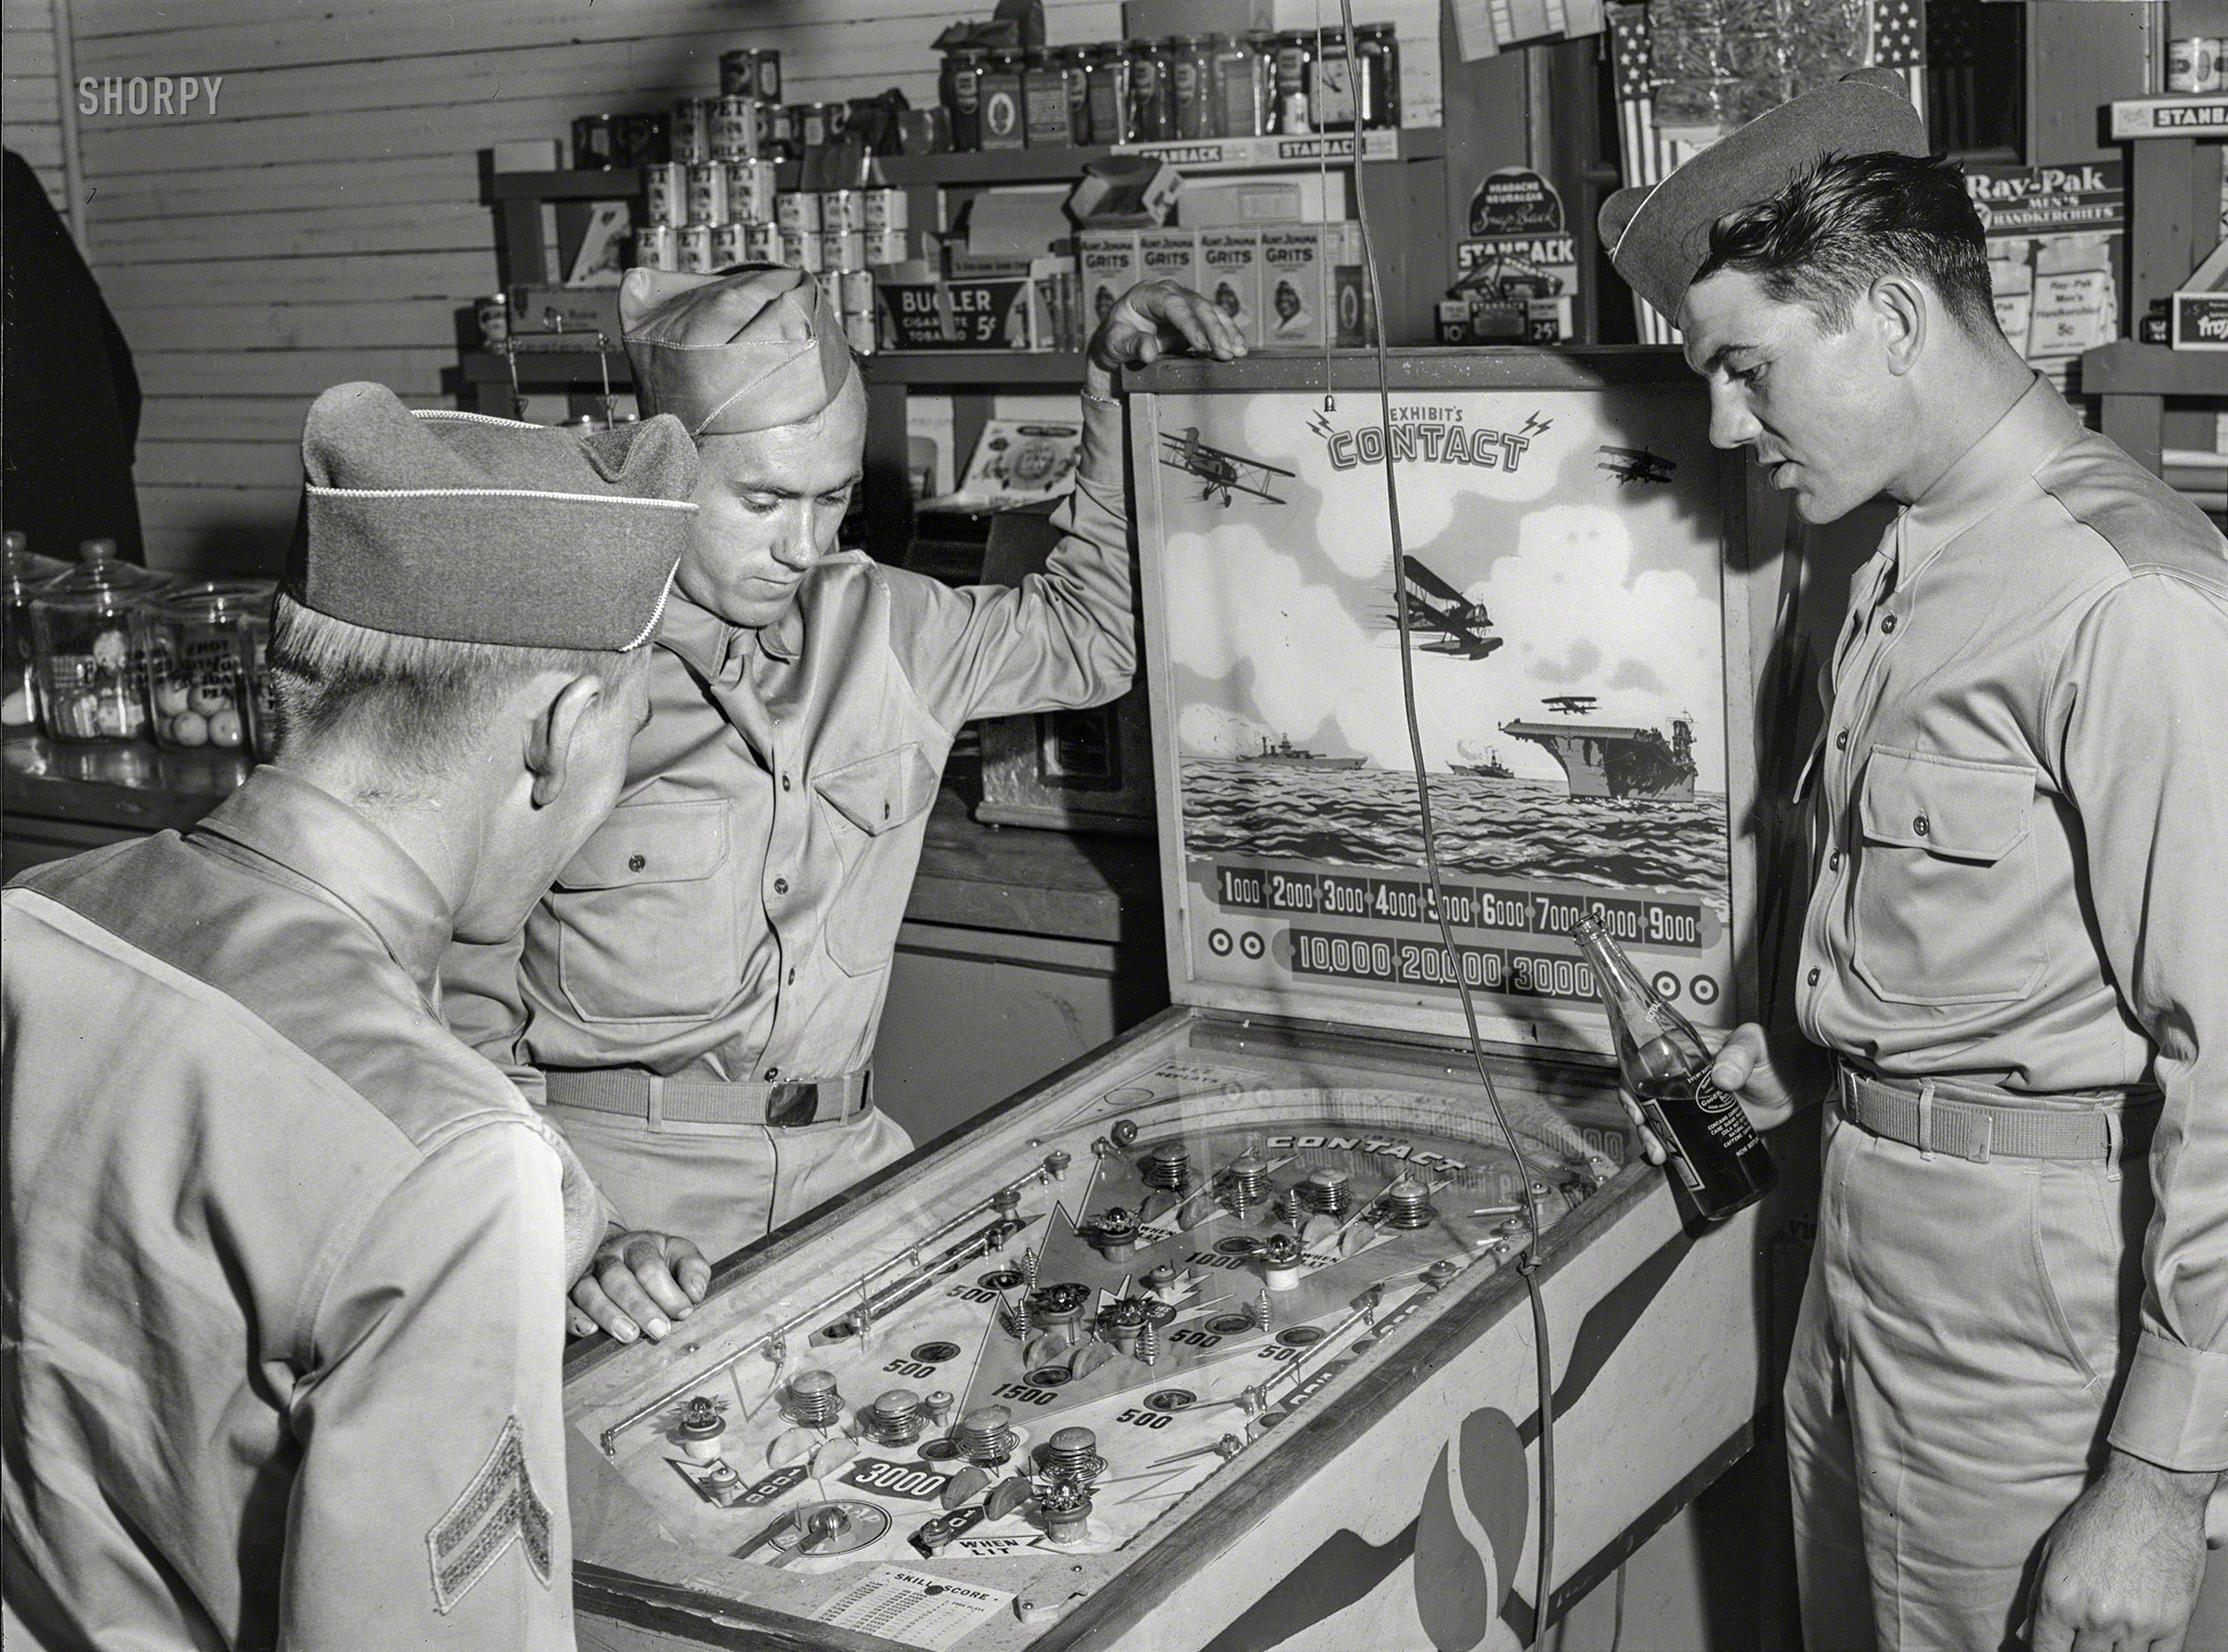 May 1941. "Soldiers from Fort Benning in a country store near Phenix City, Alabama." Medium format negative by Jack Delano. View full size.